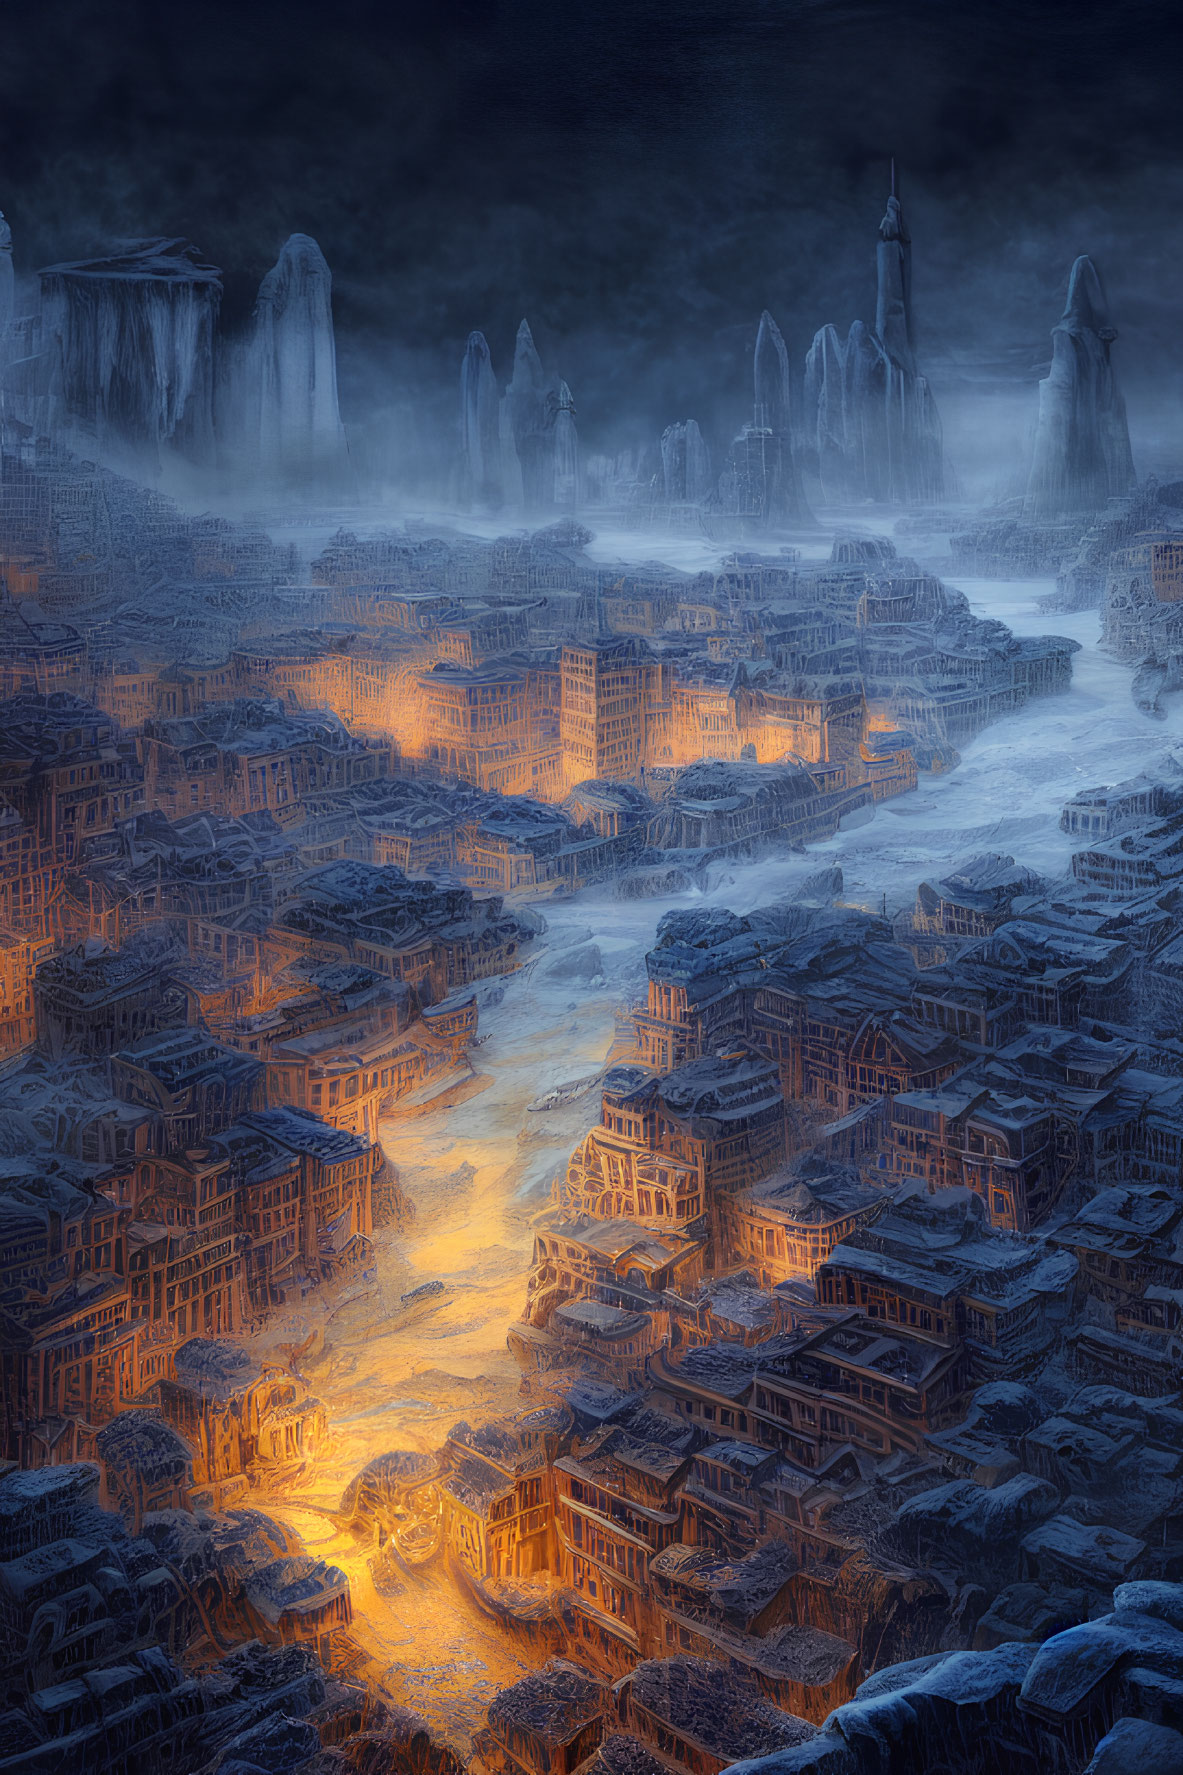 Ethereal fantasy city in icy cliffs with warm glow under dusky sky